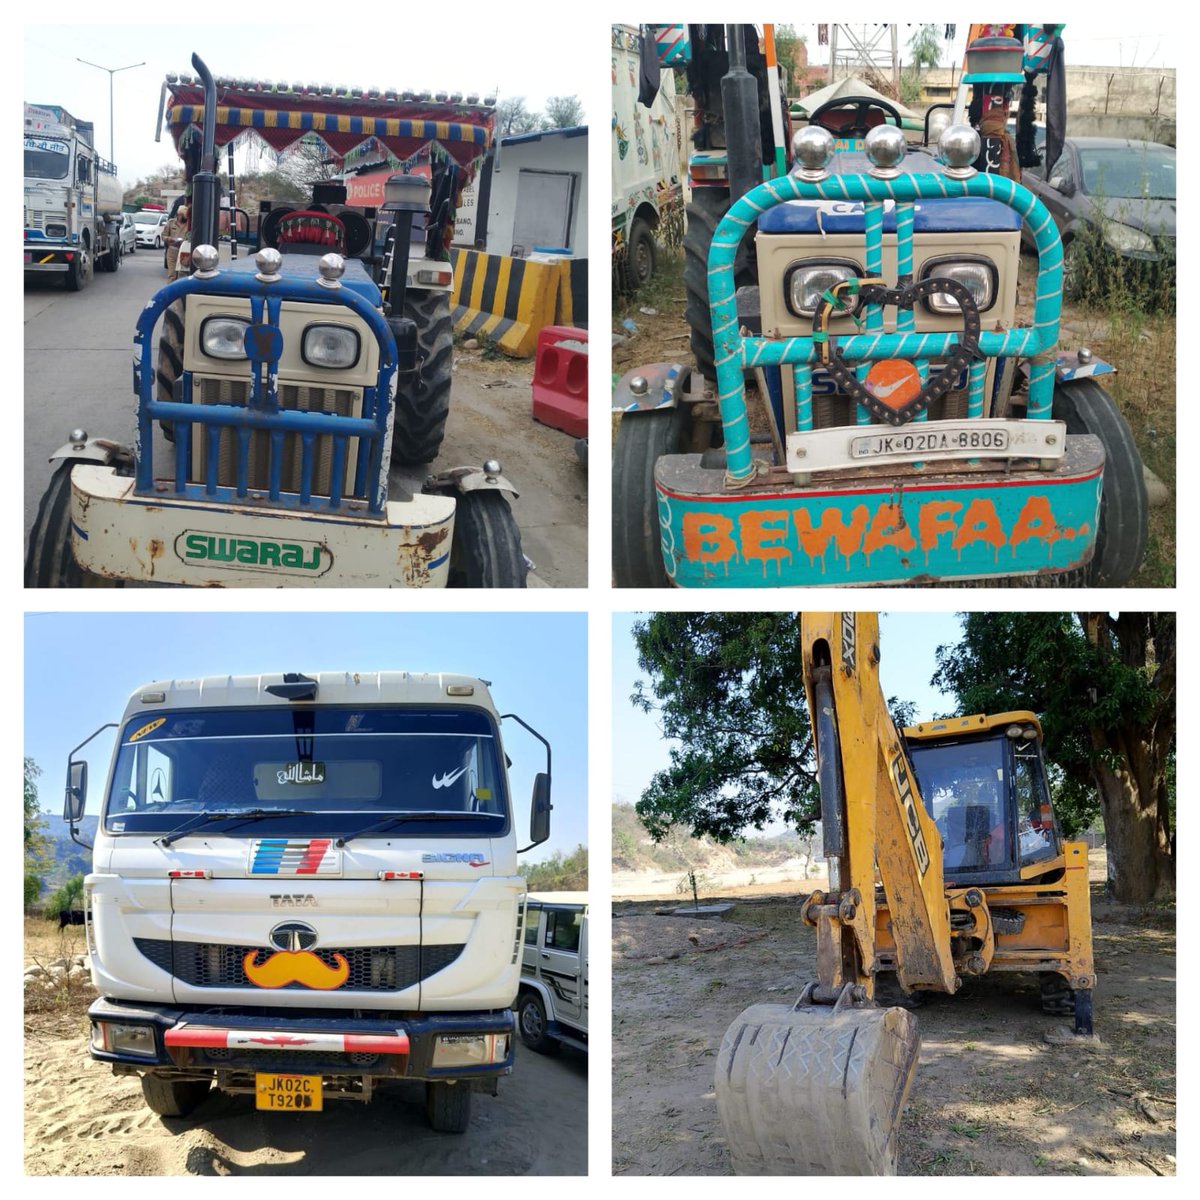 In a crackdown on illegal mining, Jammu Police detained four vehicles in the rural zone. The vehicles included two tractor trolleys, a dumper, and a JCB. The District Mining Officer was informed for necessary legal actions.